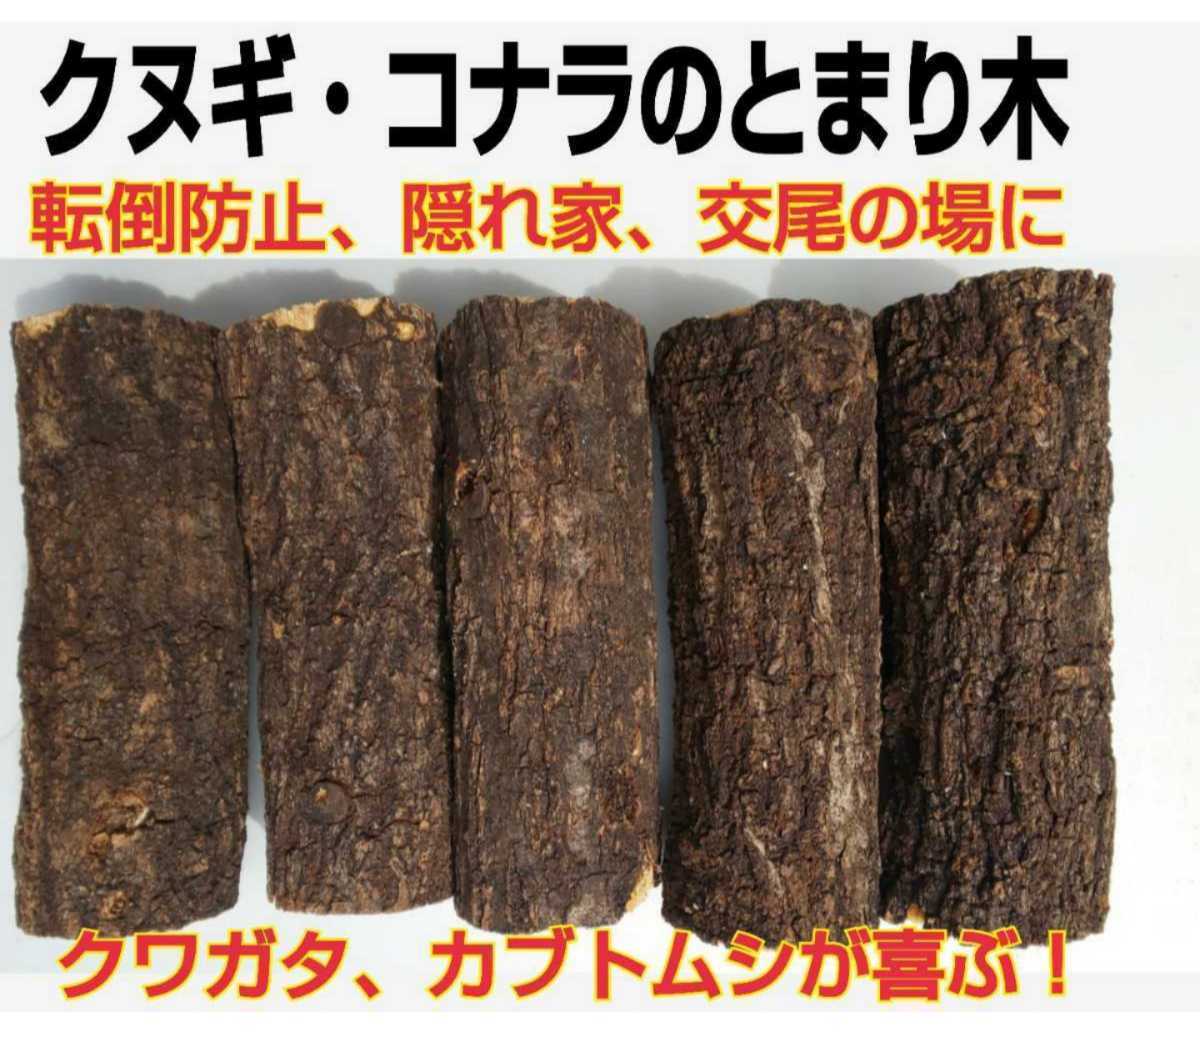  sawtooth oak, * konara oak. ... tree 5 pcs set * turning-over prevention,.. house, after tail. place, display .! stag beetle * rhinoceros beetle . most ... material.! addition OK!!